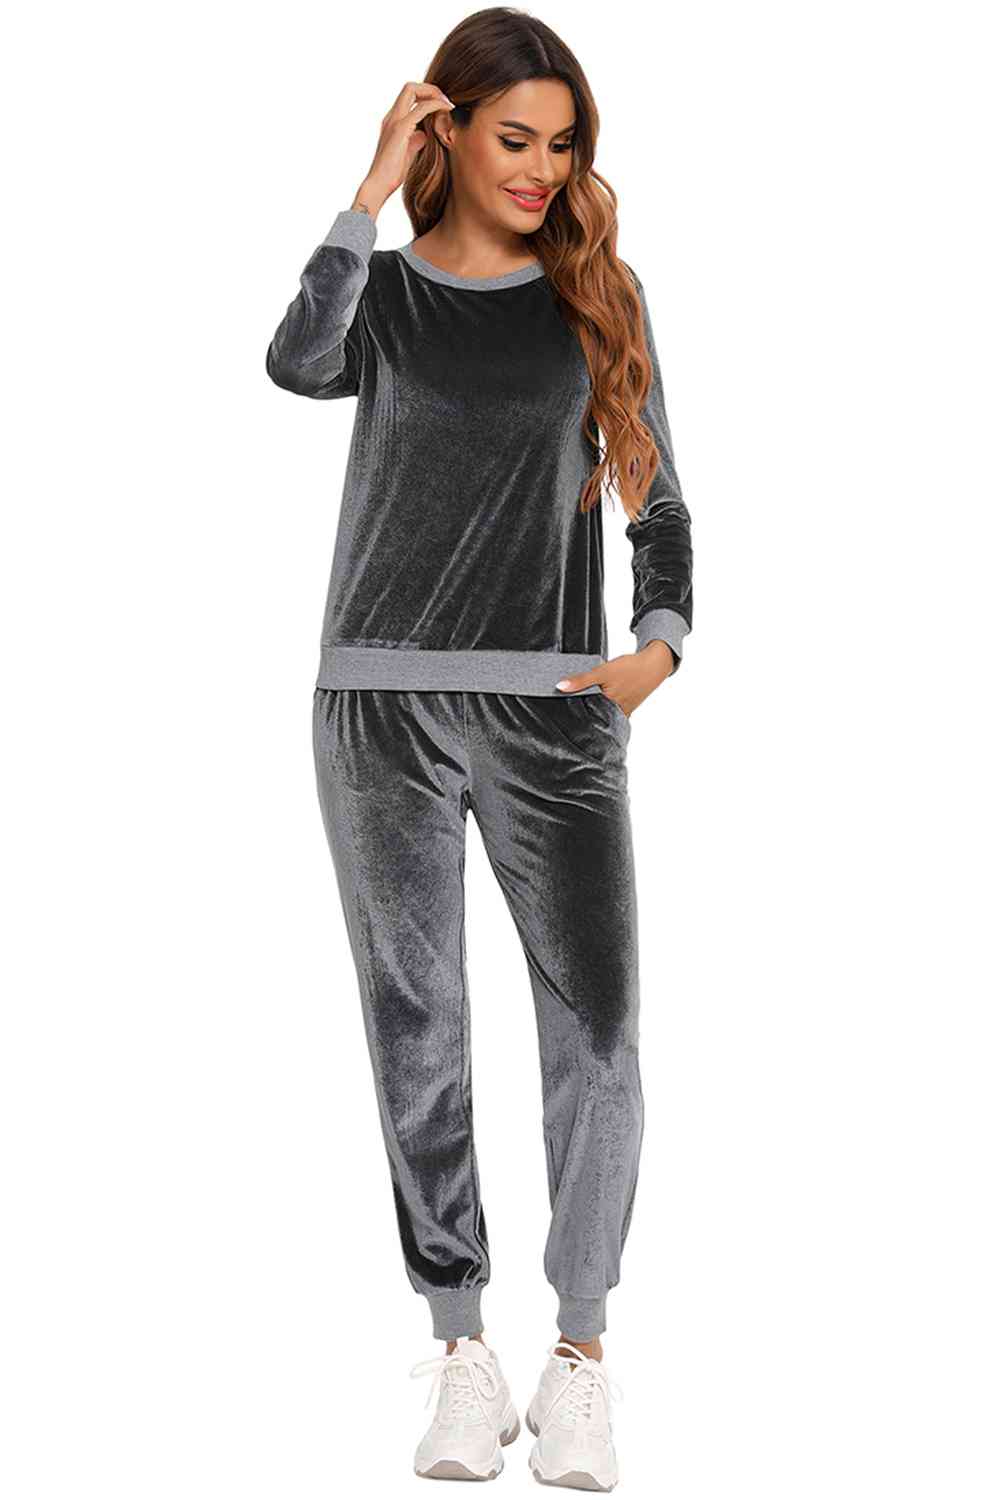 Round Neck Long Sleeve Loungewear Set with Pockets - GemThreads Boutique